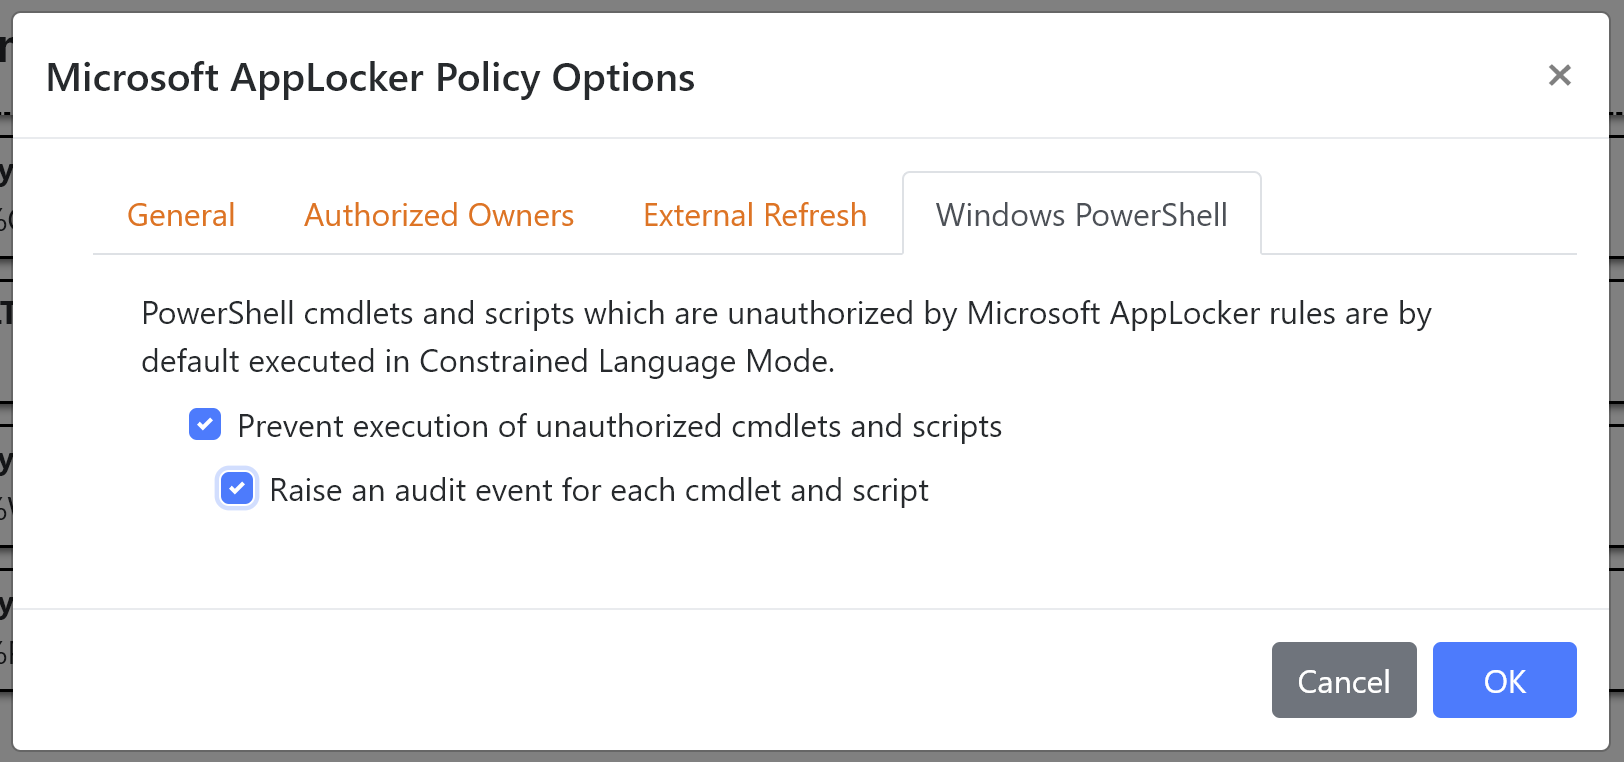 PowerShell Scripts and Cmdlets can now be prevented from executing